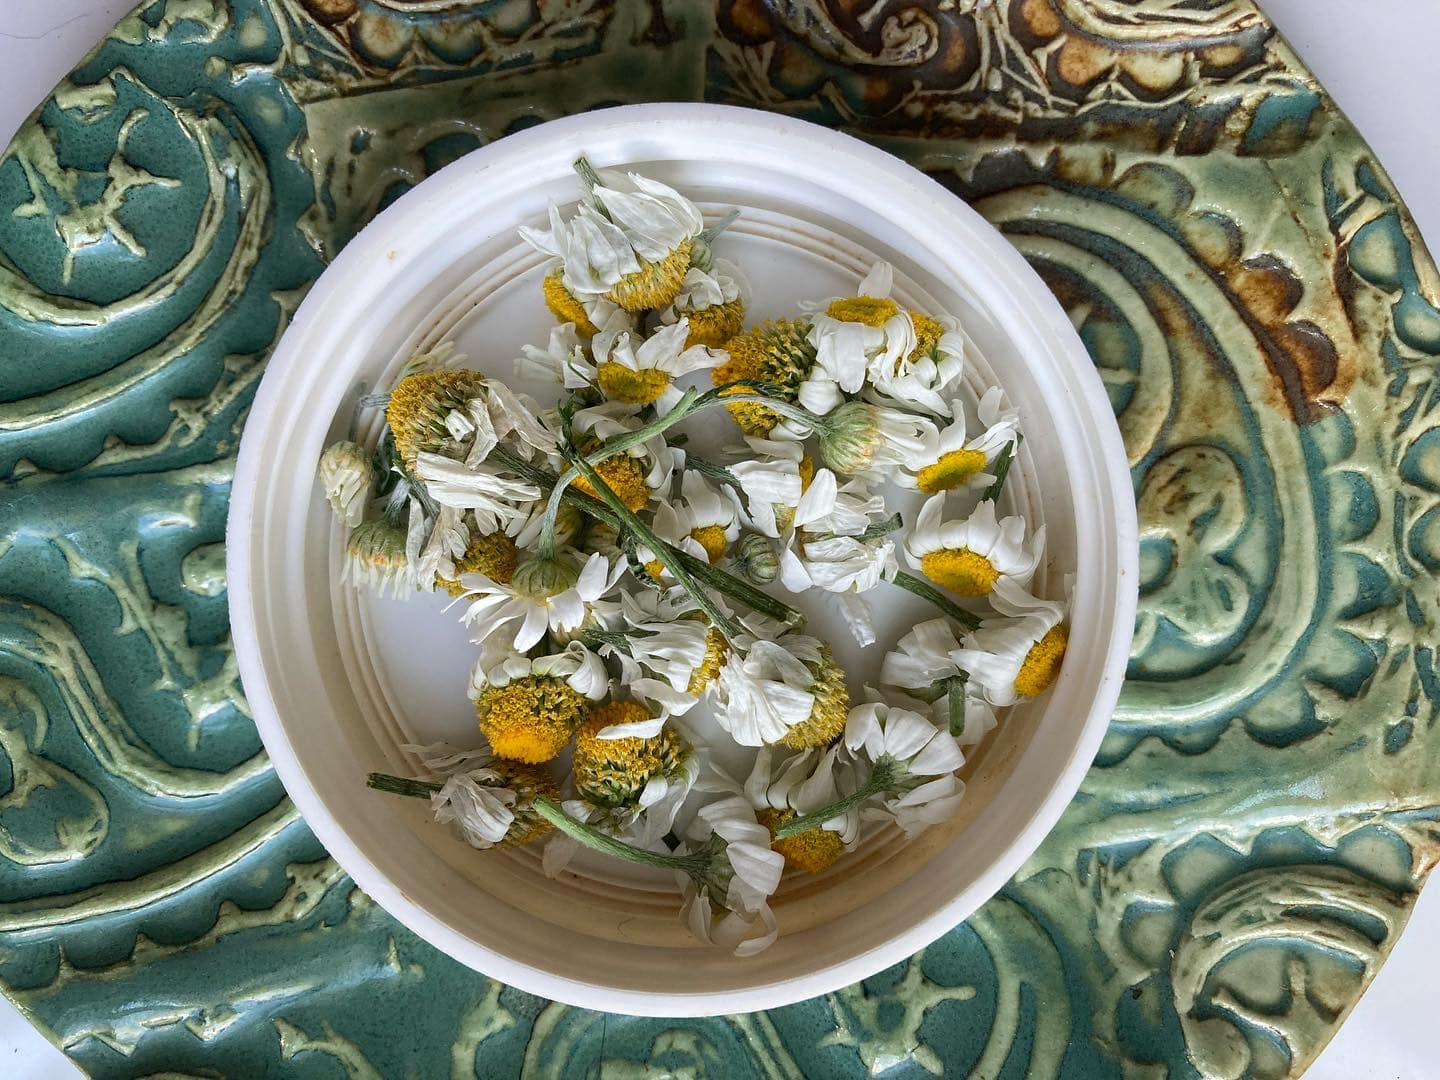 chamomile flowers grown, harvested, and dried by Sienna Mae Heath